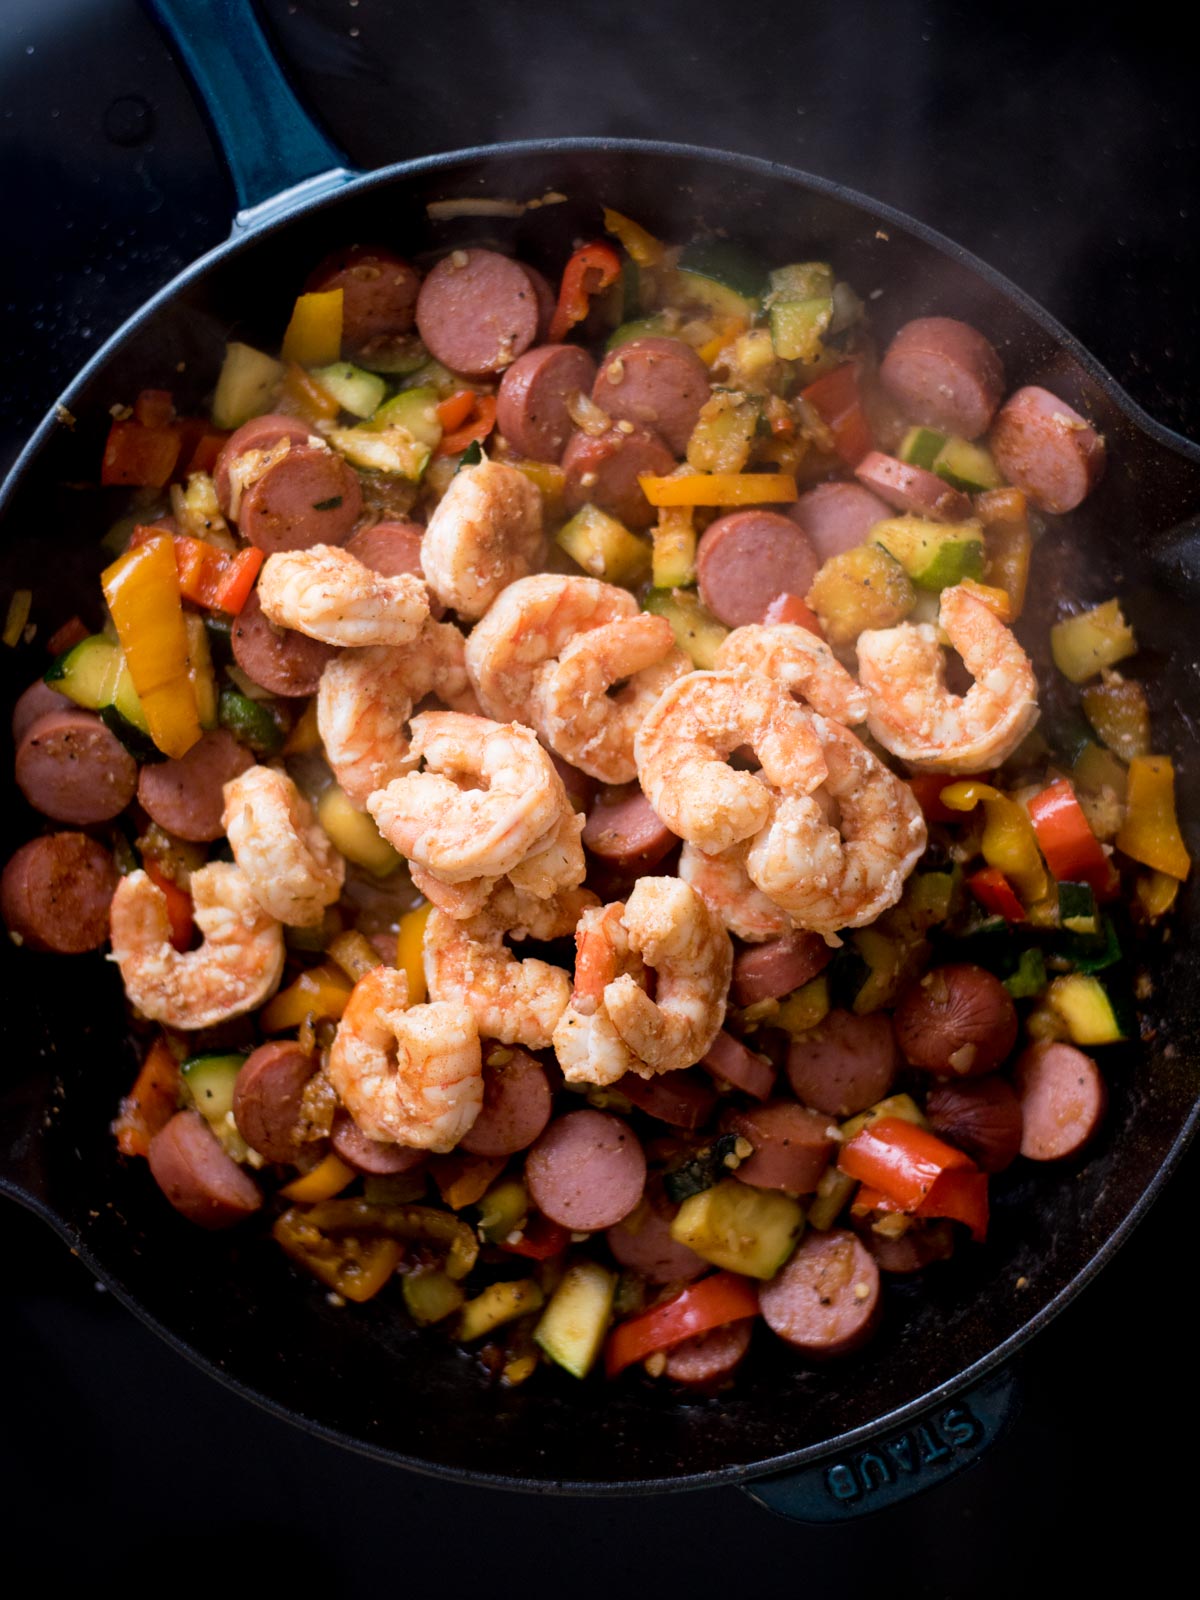 Shrimp added to cooked sausage and veggies in a cast iron skillet.